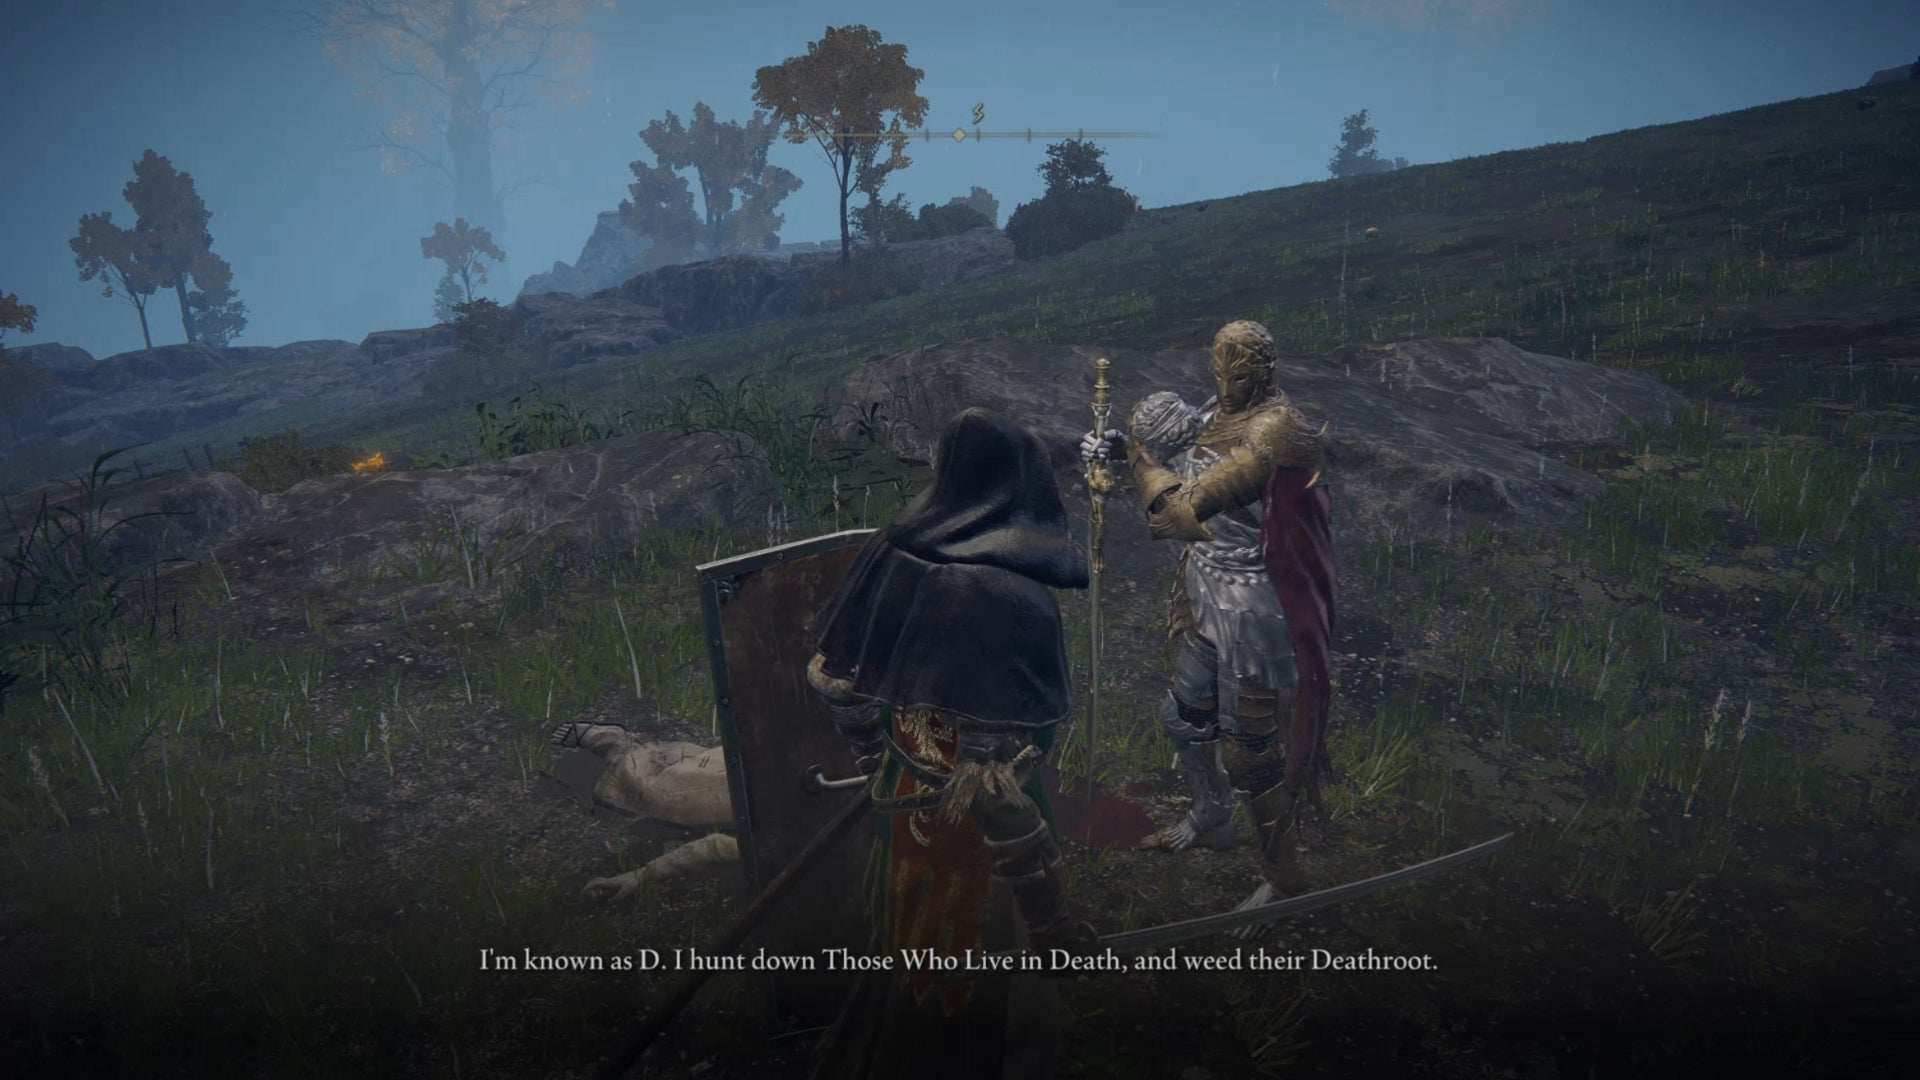 The player meets the character D, Hunter of the Dead, for the first time in Elden Ring.